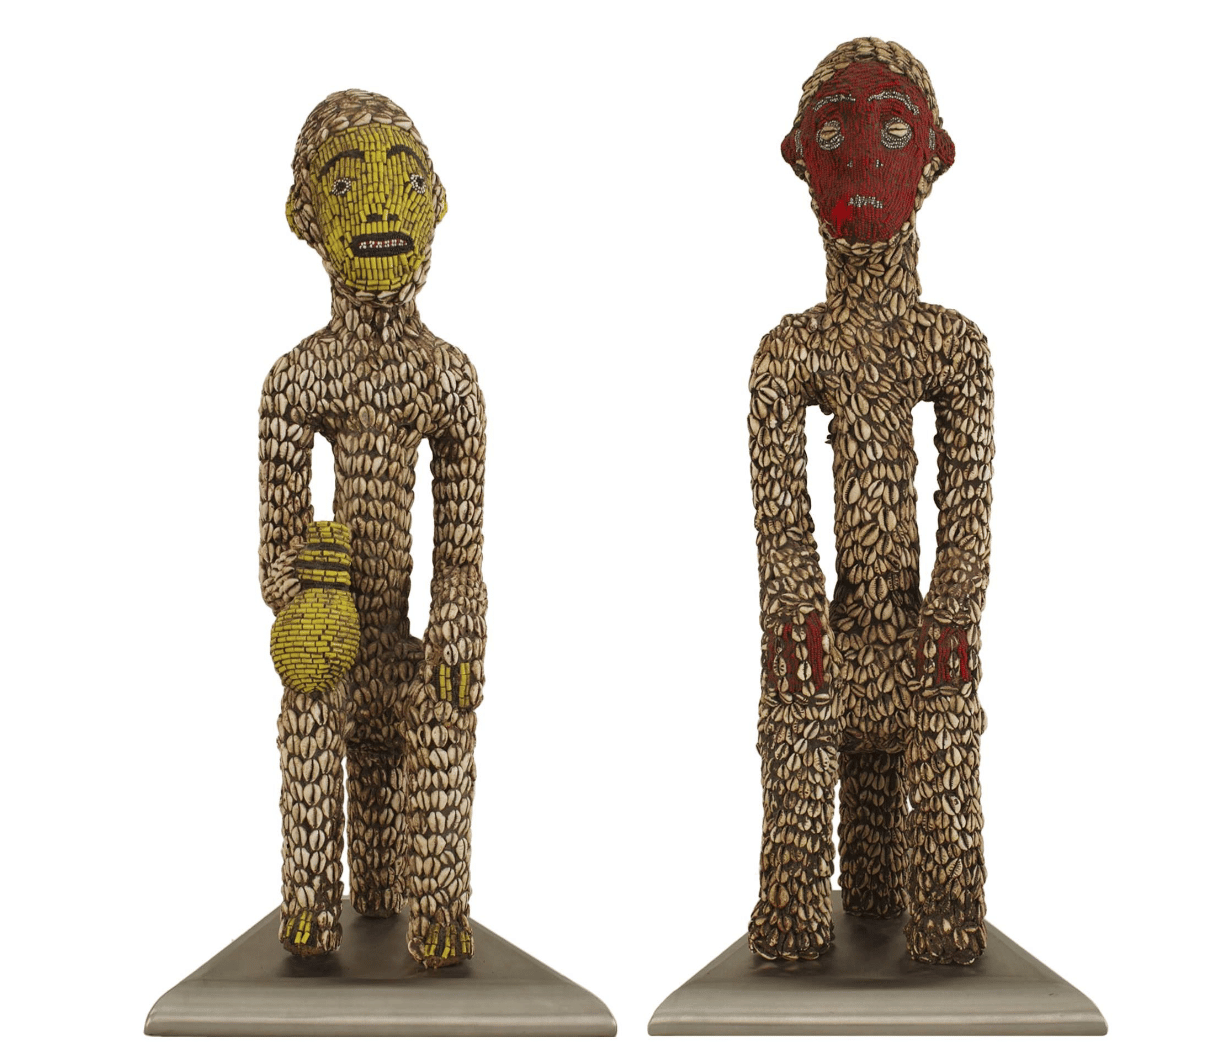 African fertility idol figures from the 20th century made of wood and adorned with cowrie shells